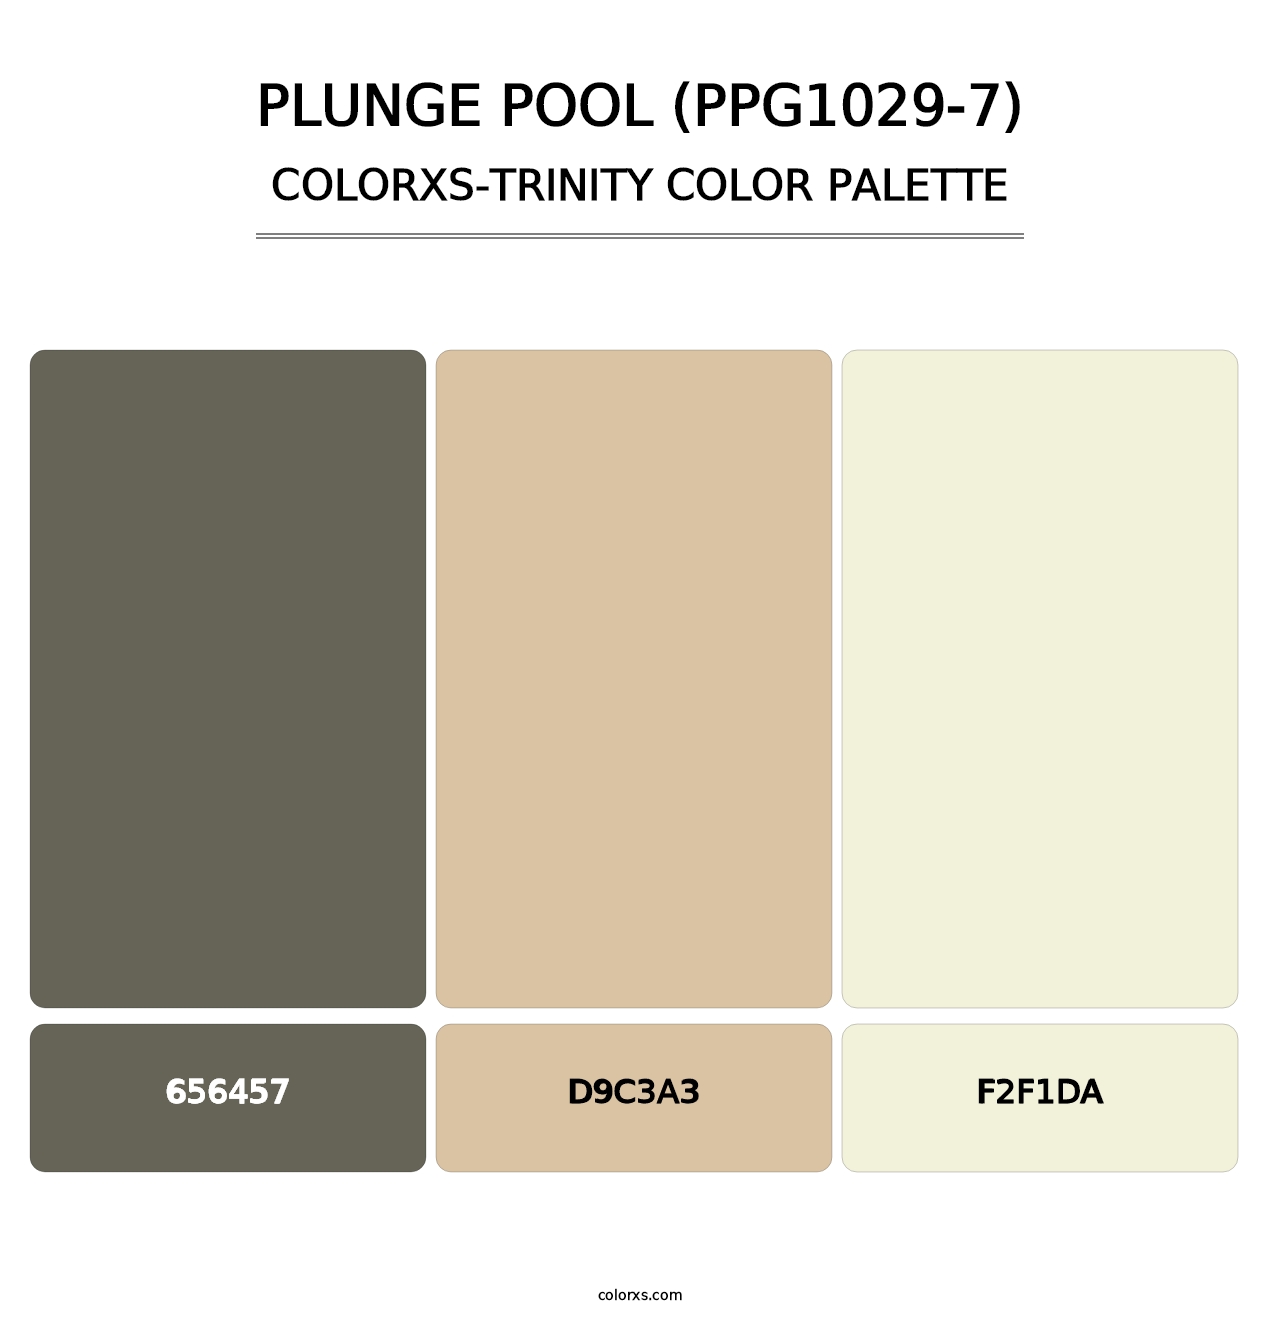 Plunge Pool (PPG1029-7) - Colorxs Trinity Palette